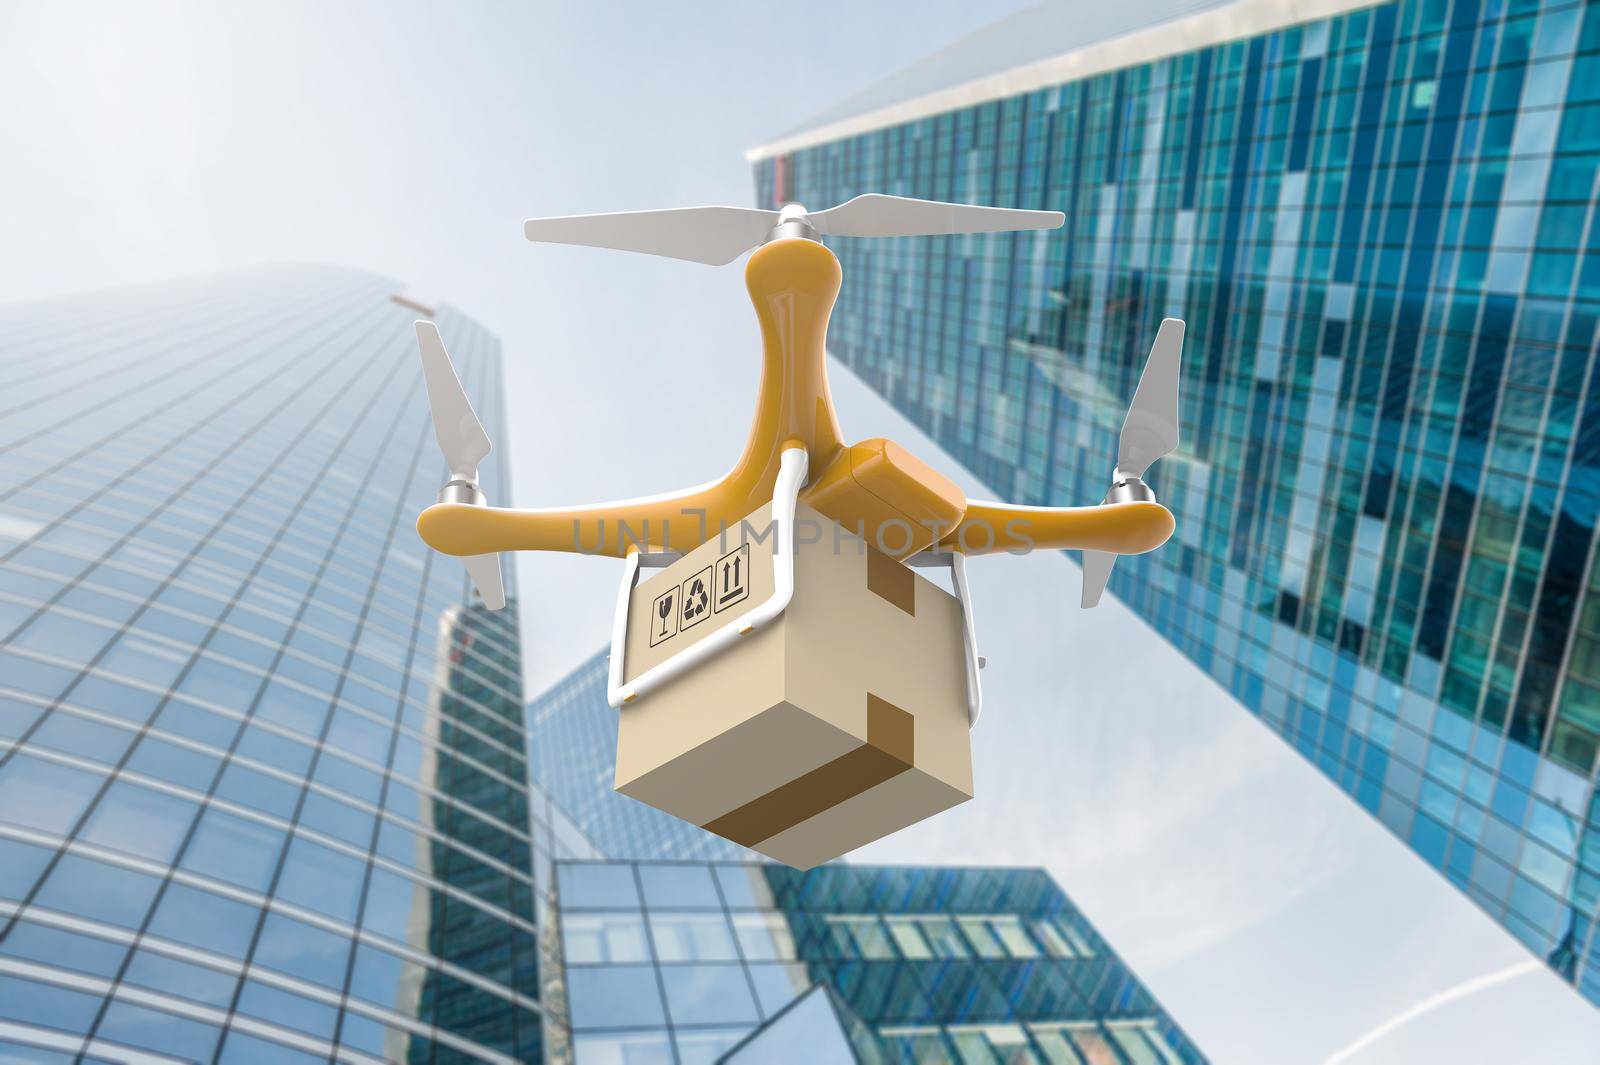 Drone flying with a delivery box package in a city: 3D rendering